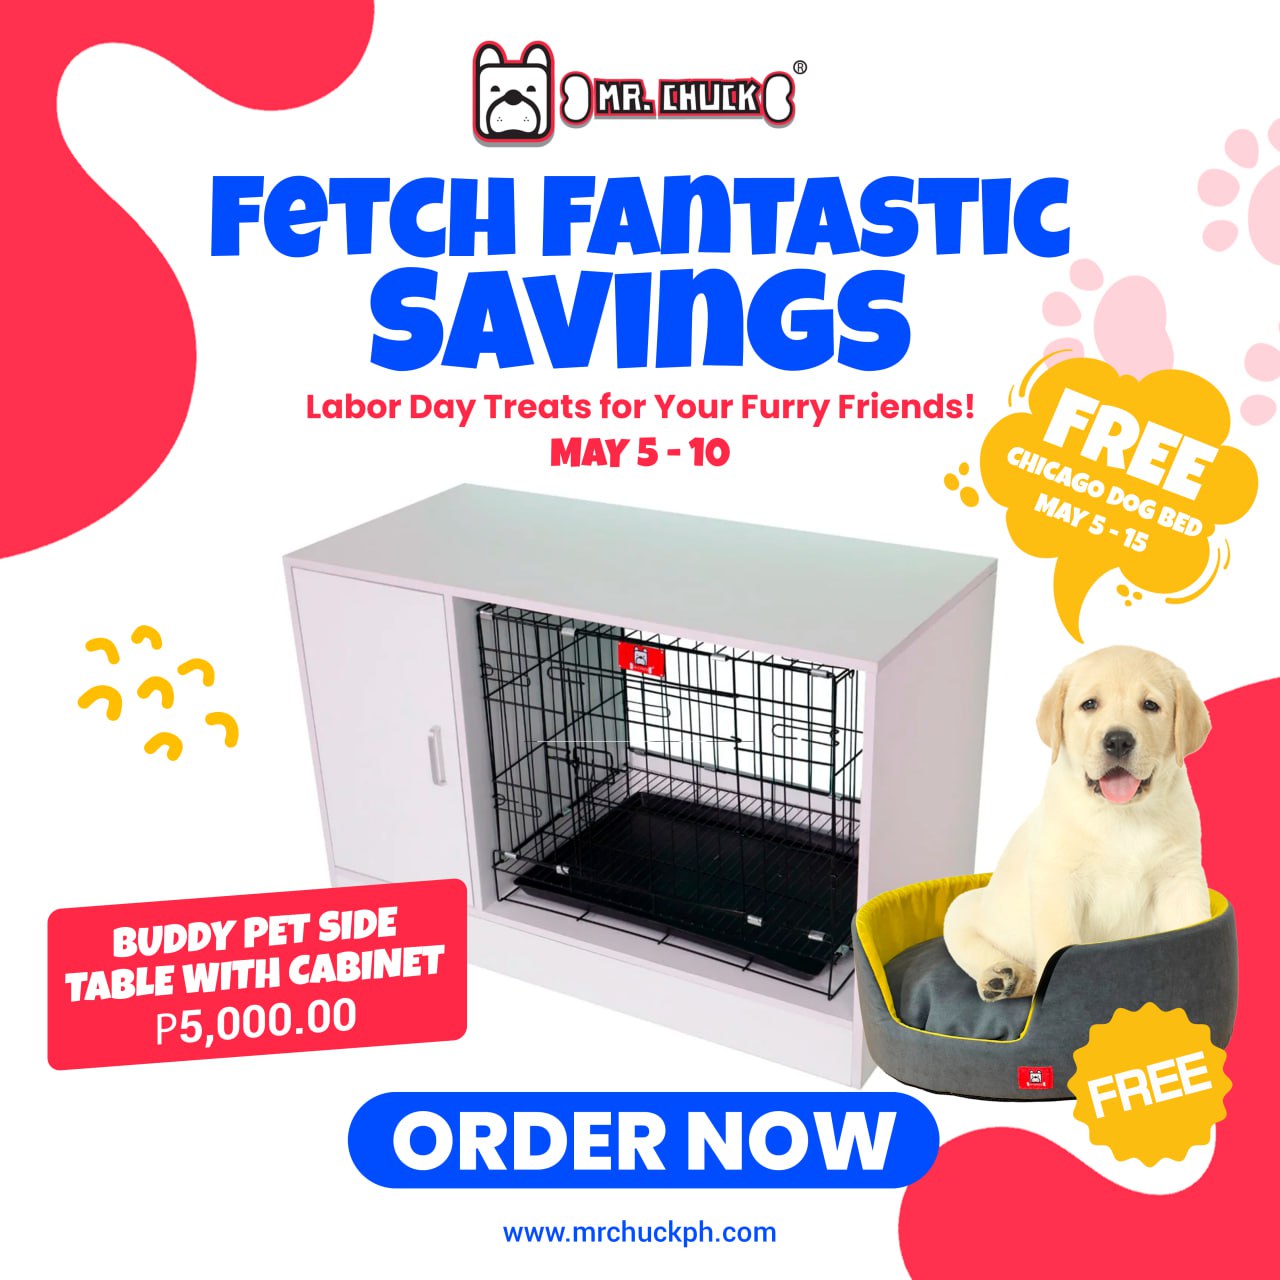 BUDDY Pet Side Table with Cabinet | Fetch Fantastic Savings Mr. Chuck Pet Store